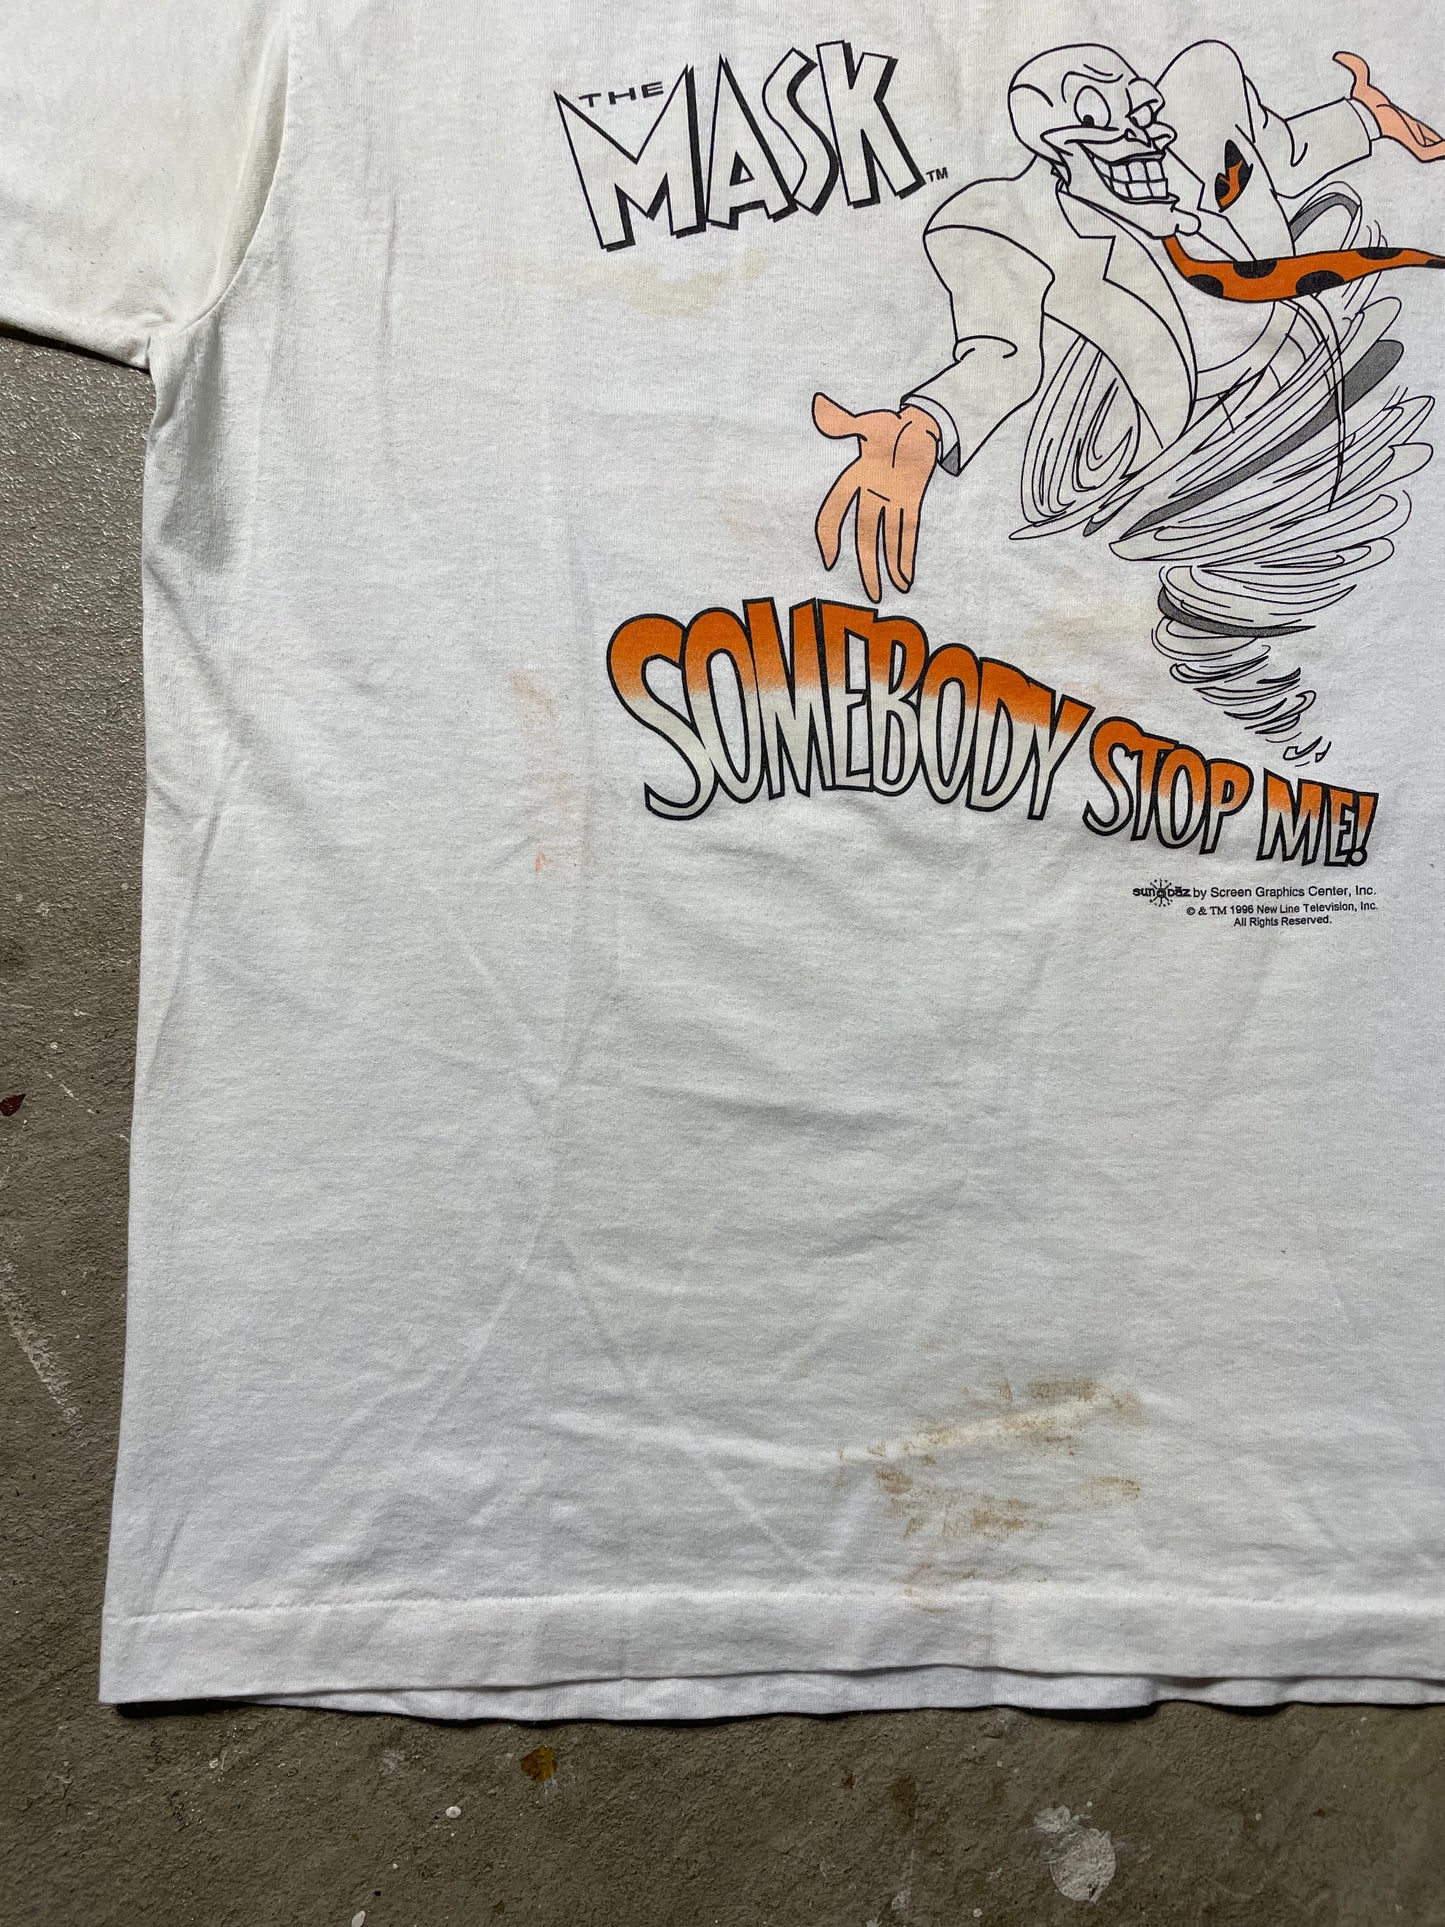 1996 The Mask ‘Somebody Stop Me!’ Tee